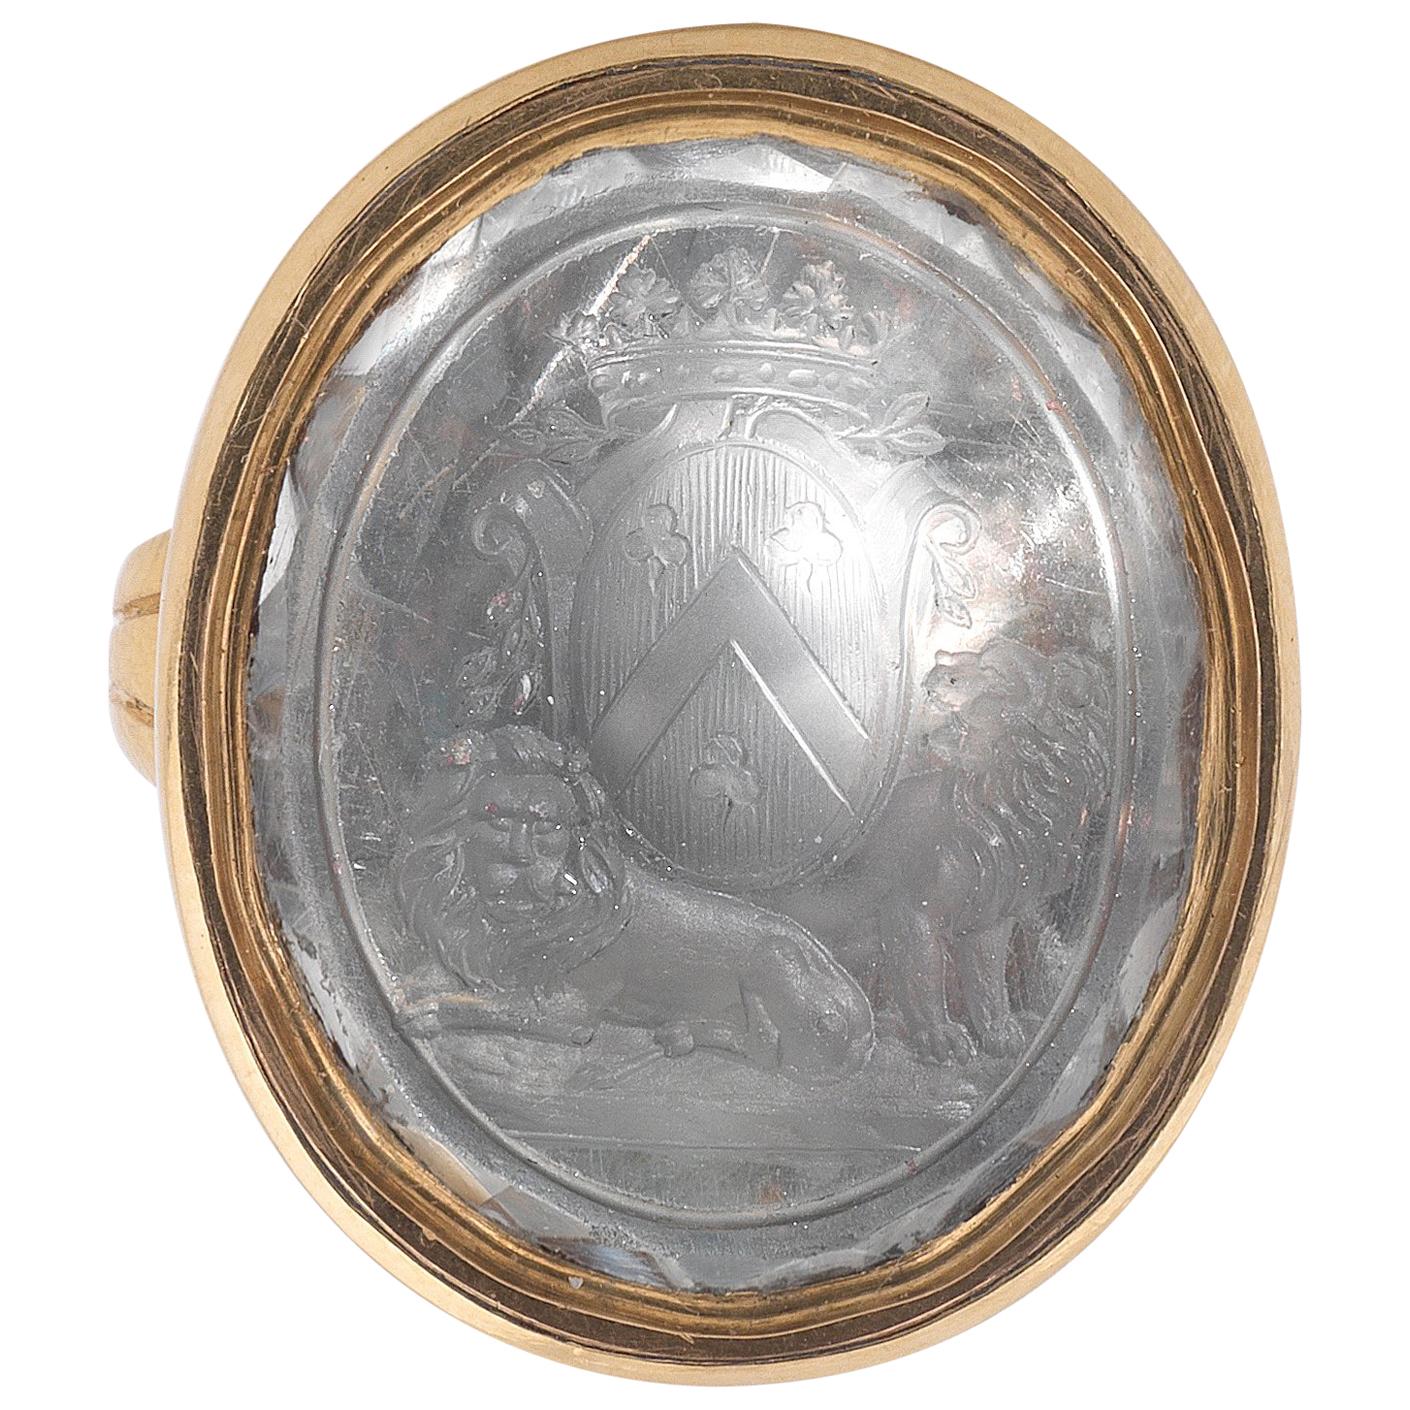 Rock Crystal Intaglio of a French Crest, Late 18th Century